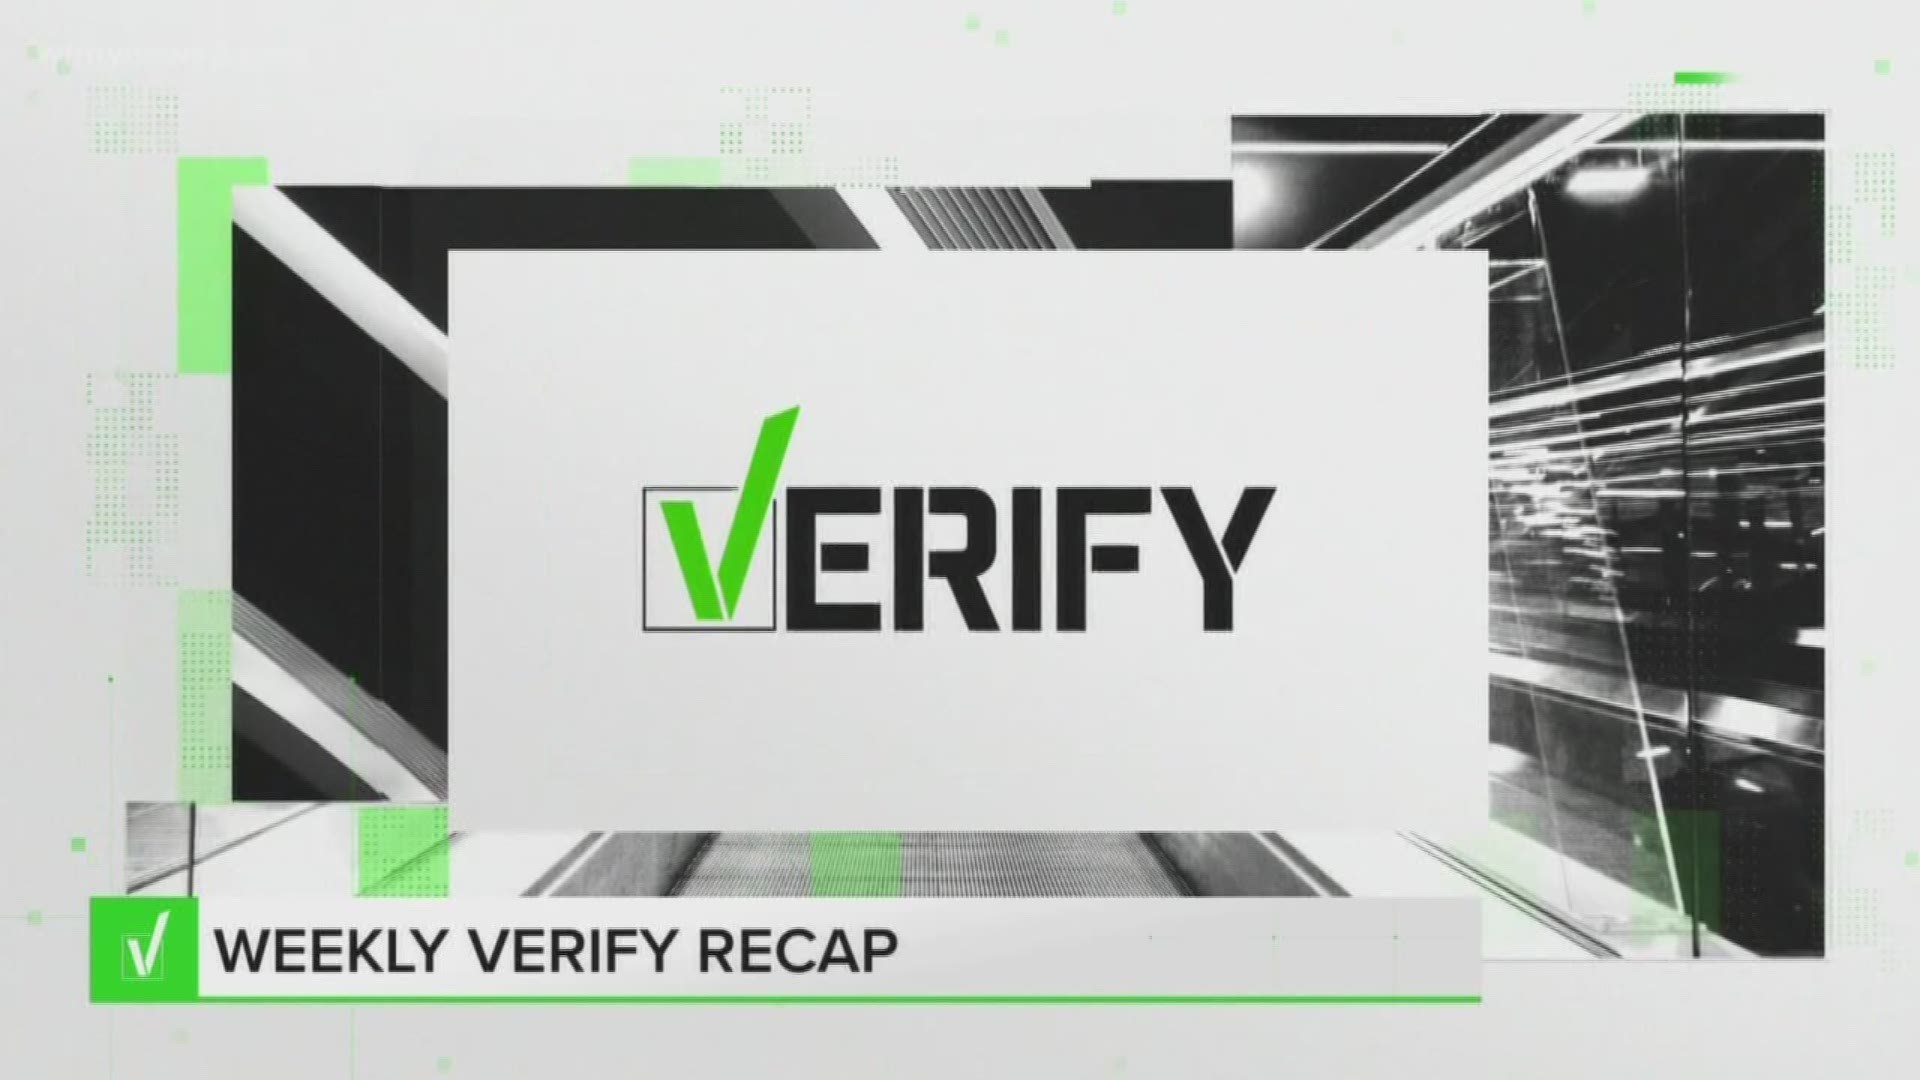 You ask; we VERIFY. From hair loss shampoo to hurricane prevalence, Good Morning Show viewers asked Meghann to VERIFY a wide range of questions this week (8/26-8/30).